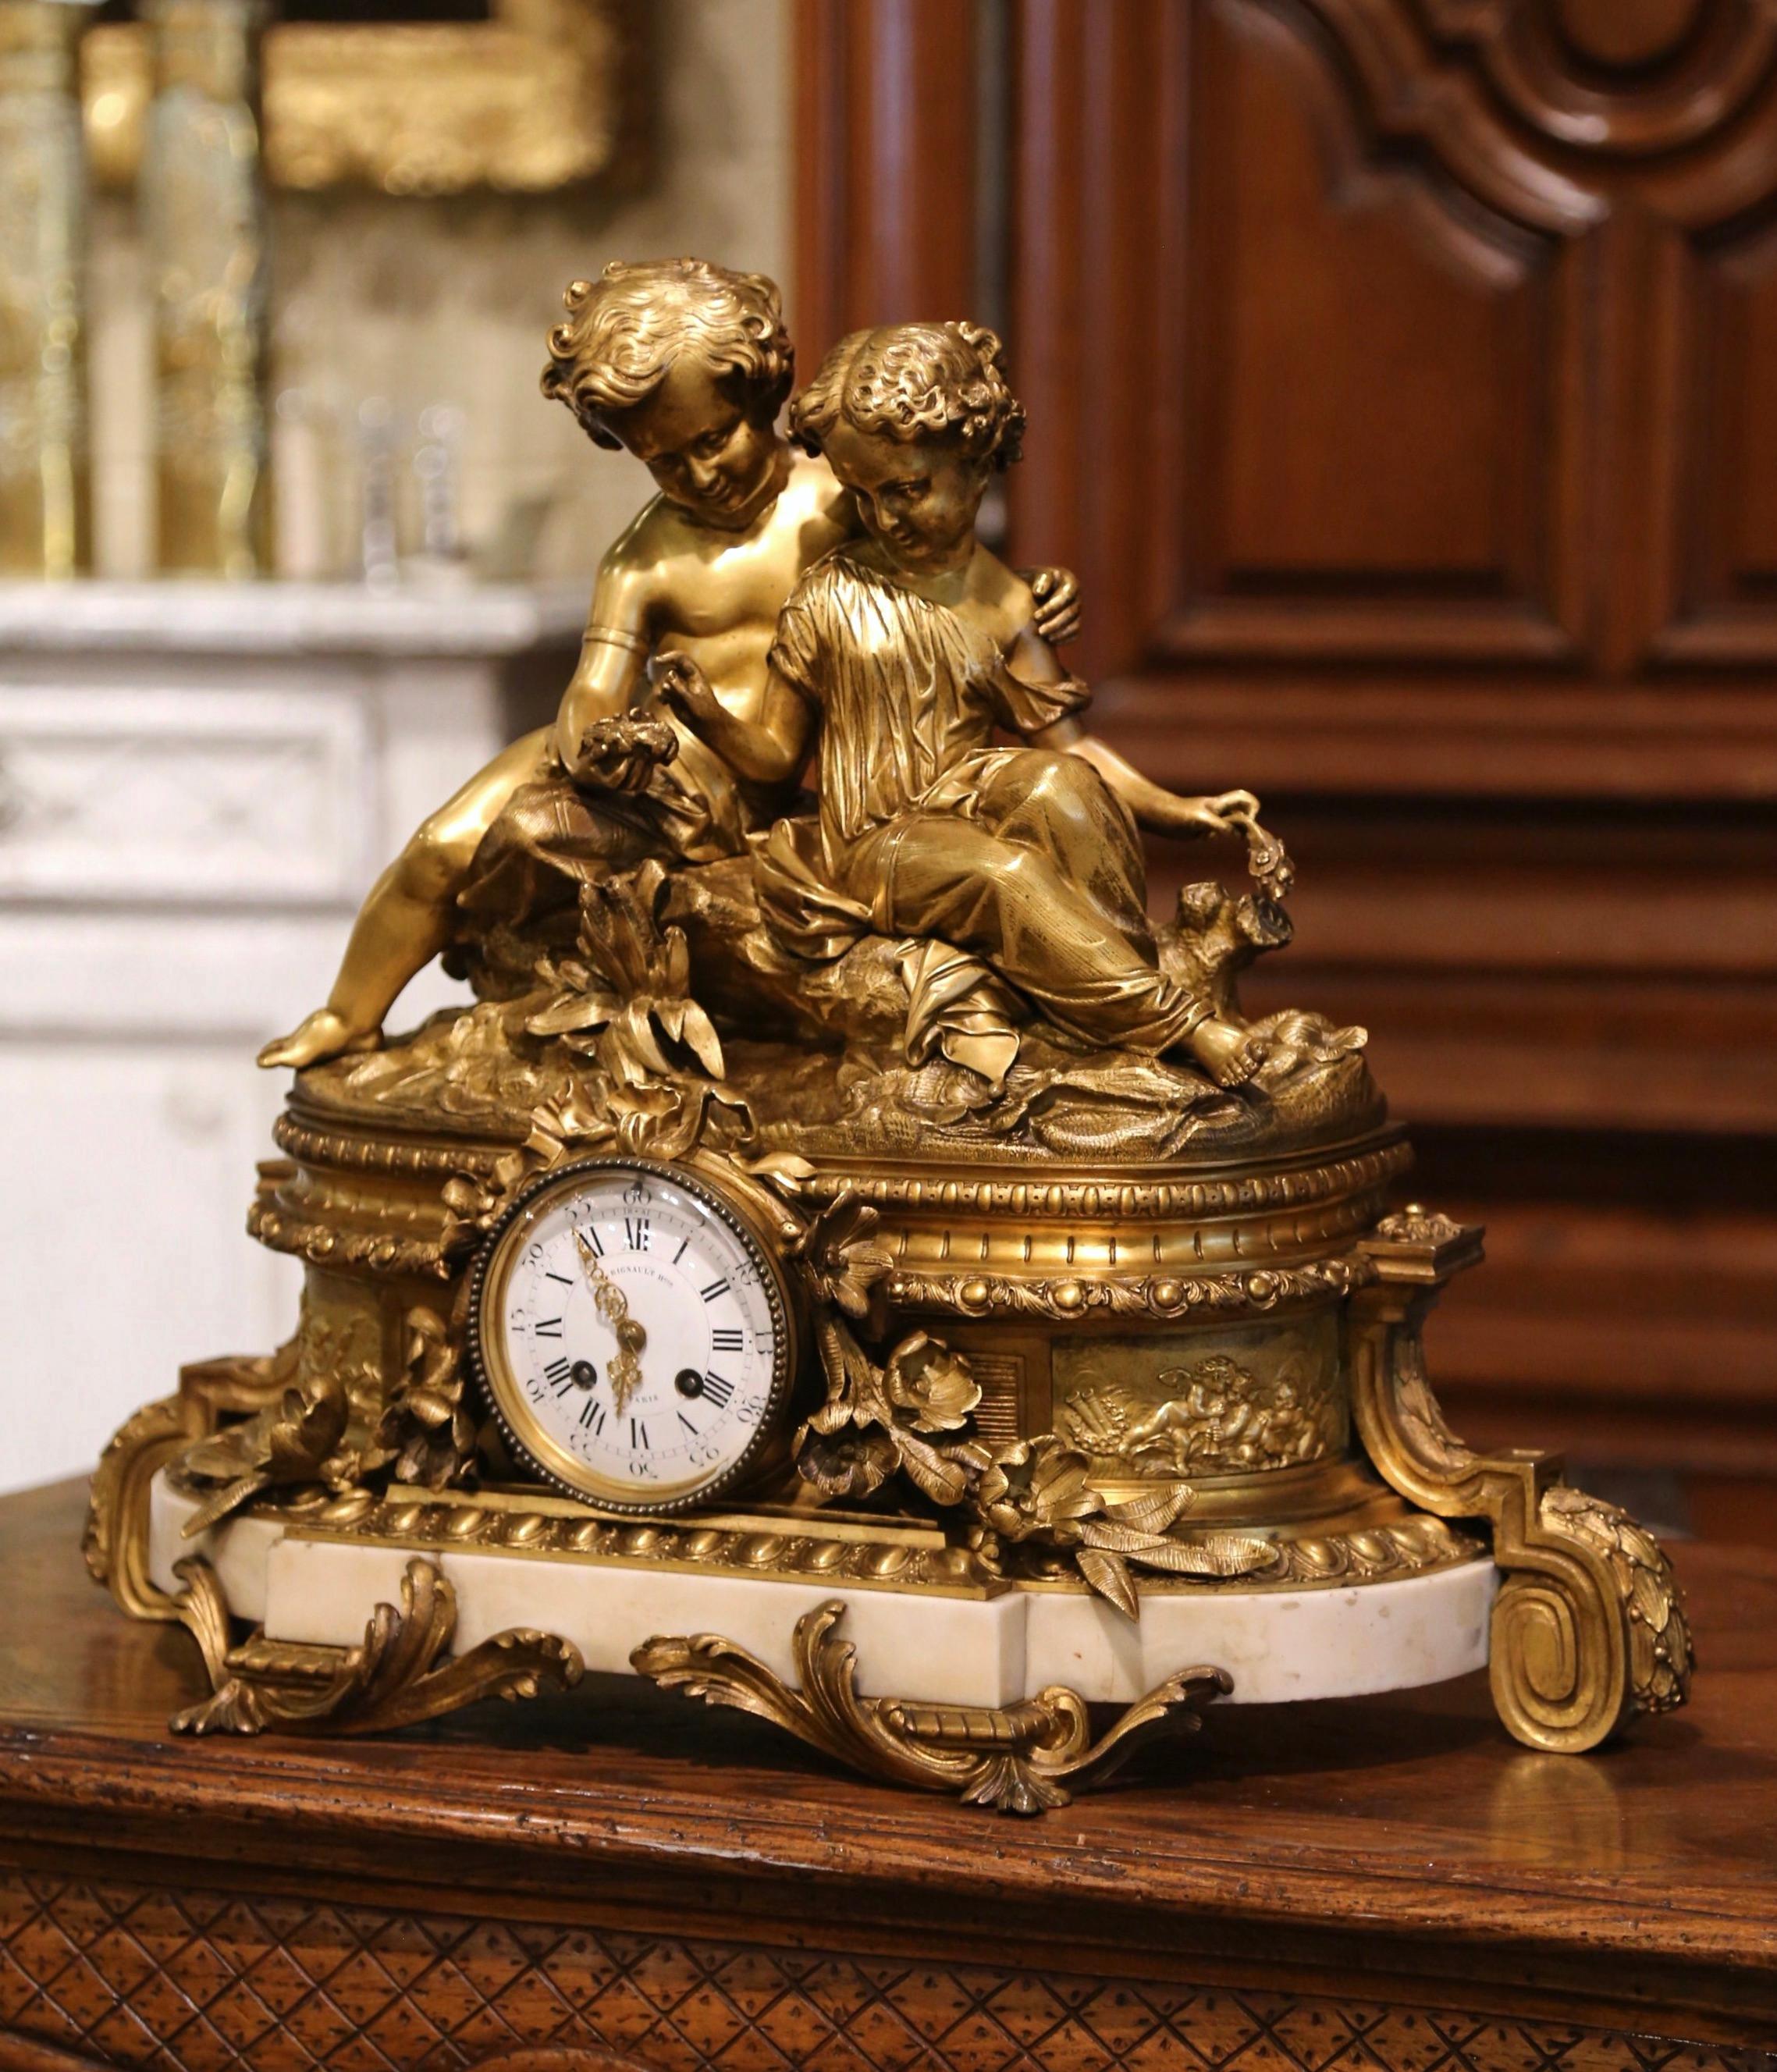 Crafted in Paris, France circa 1860, the antique time keeper rests on an attached white marble base over scrolled feet; the clock is decorated with two sited young lovers holding a bird nest and laughing. The clock is further embellished with